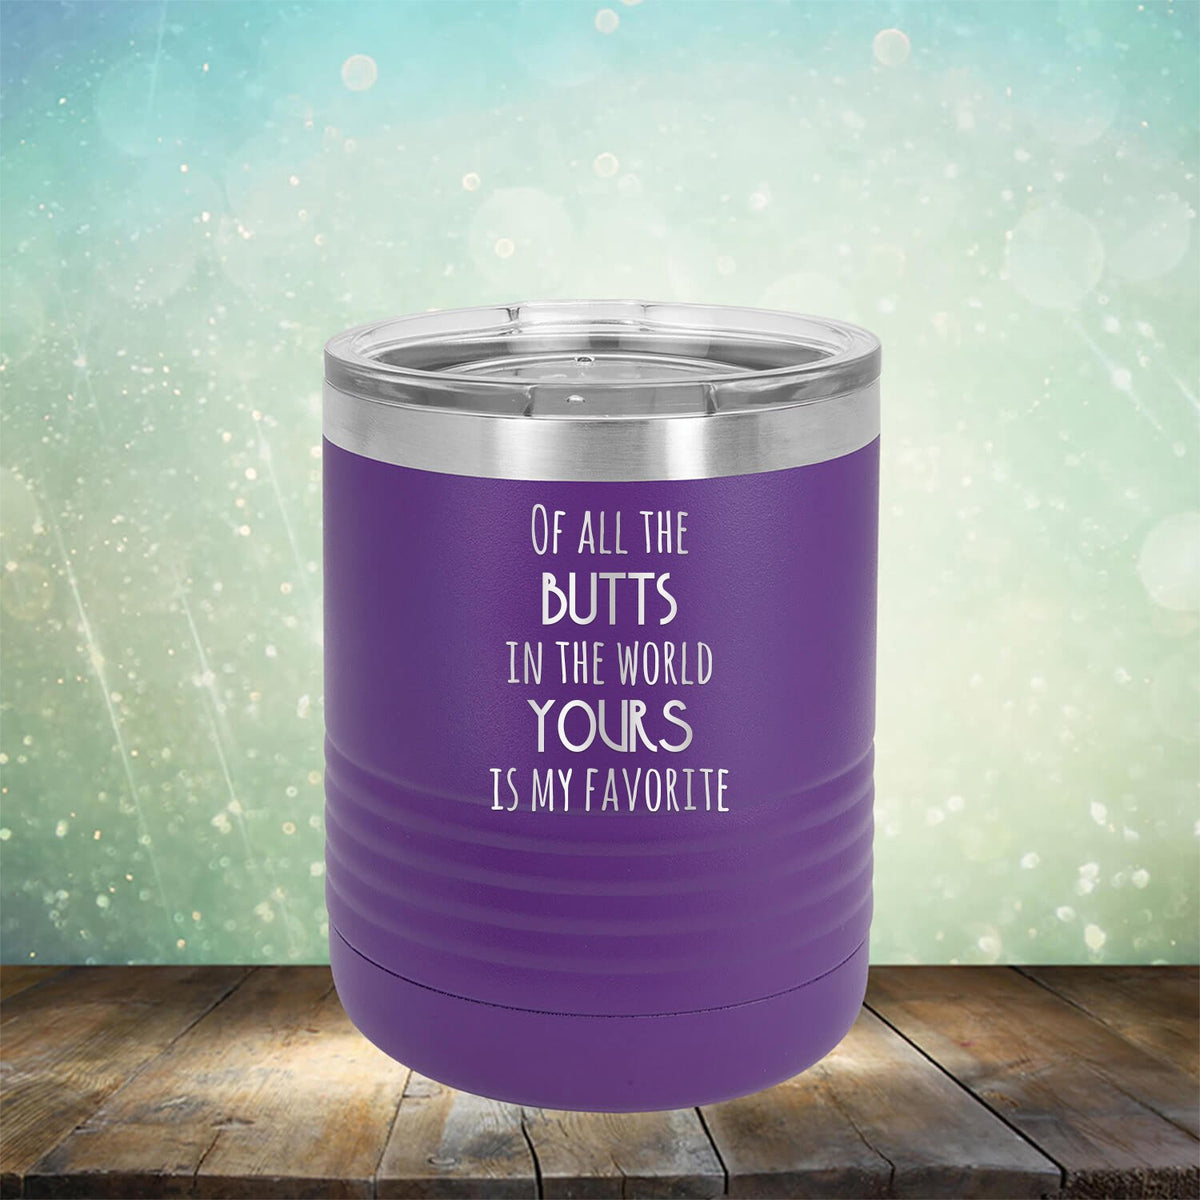 Off All the Butts in the World Yours is My Favorite - Laser Etched Tumbler Mug